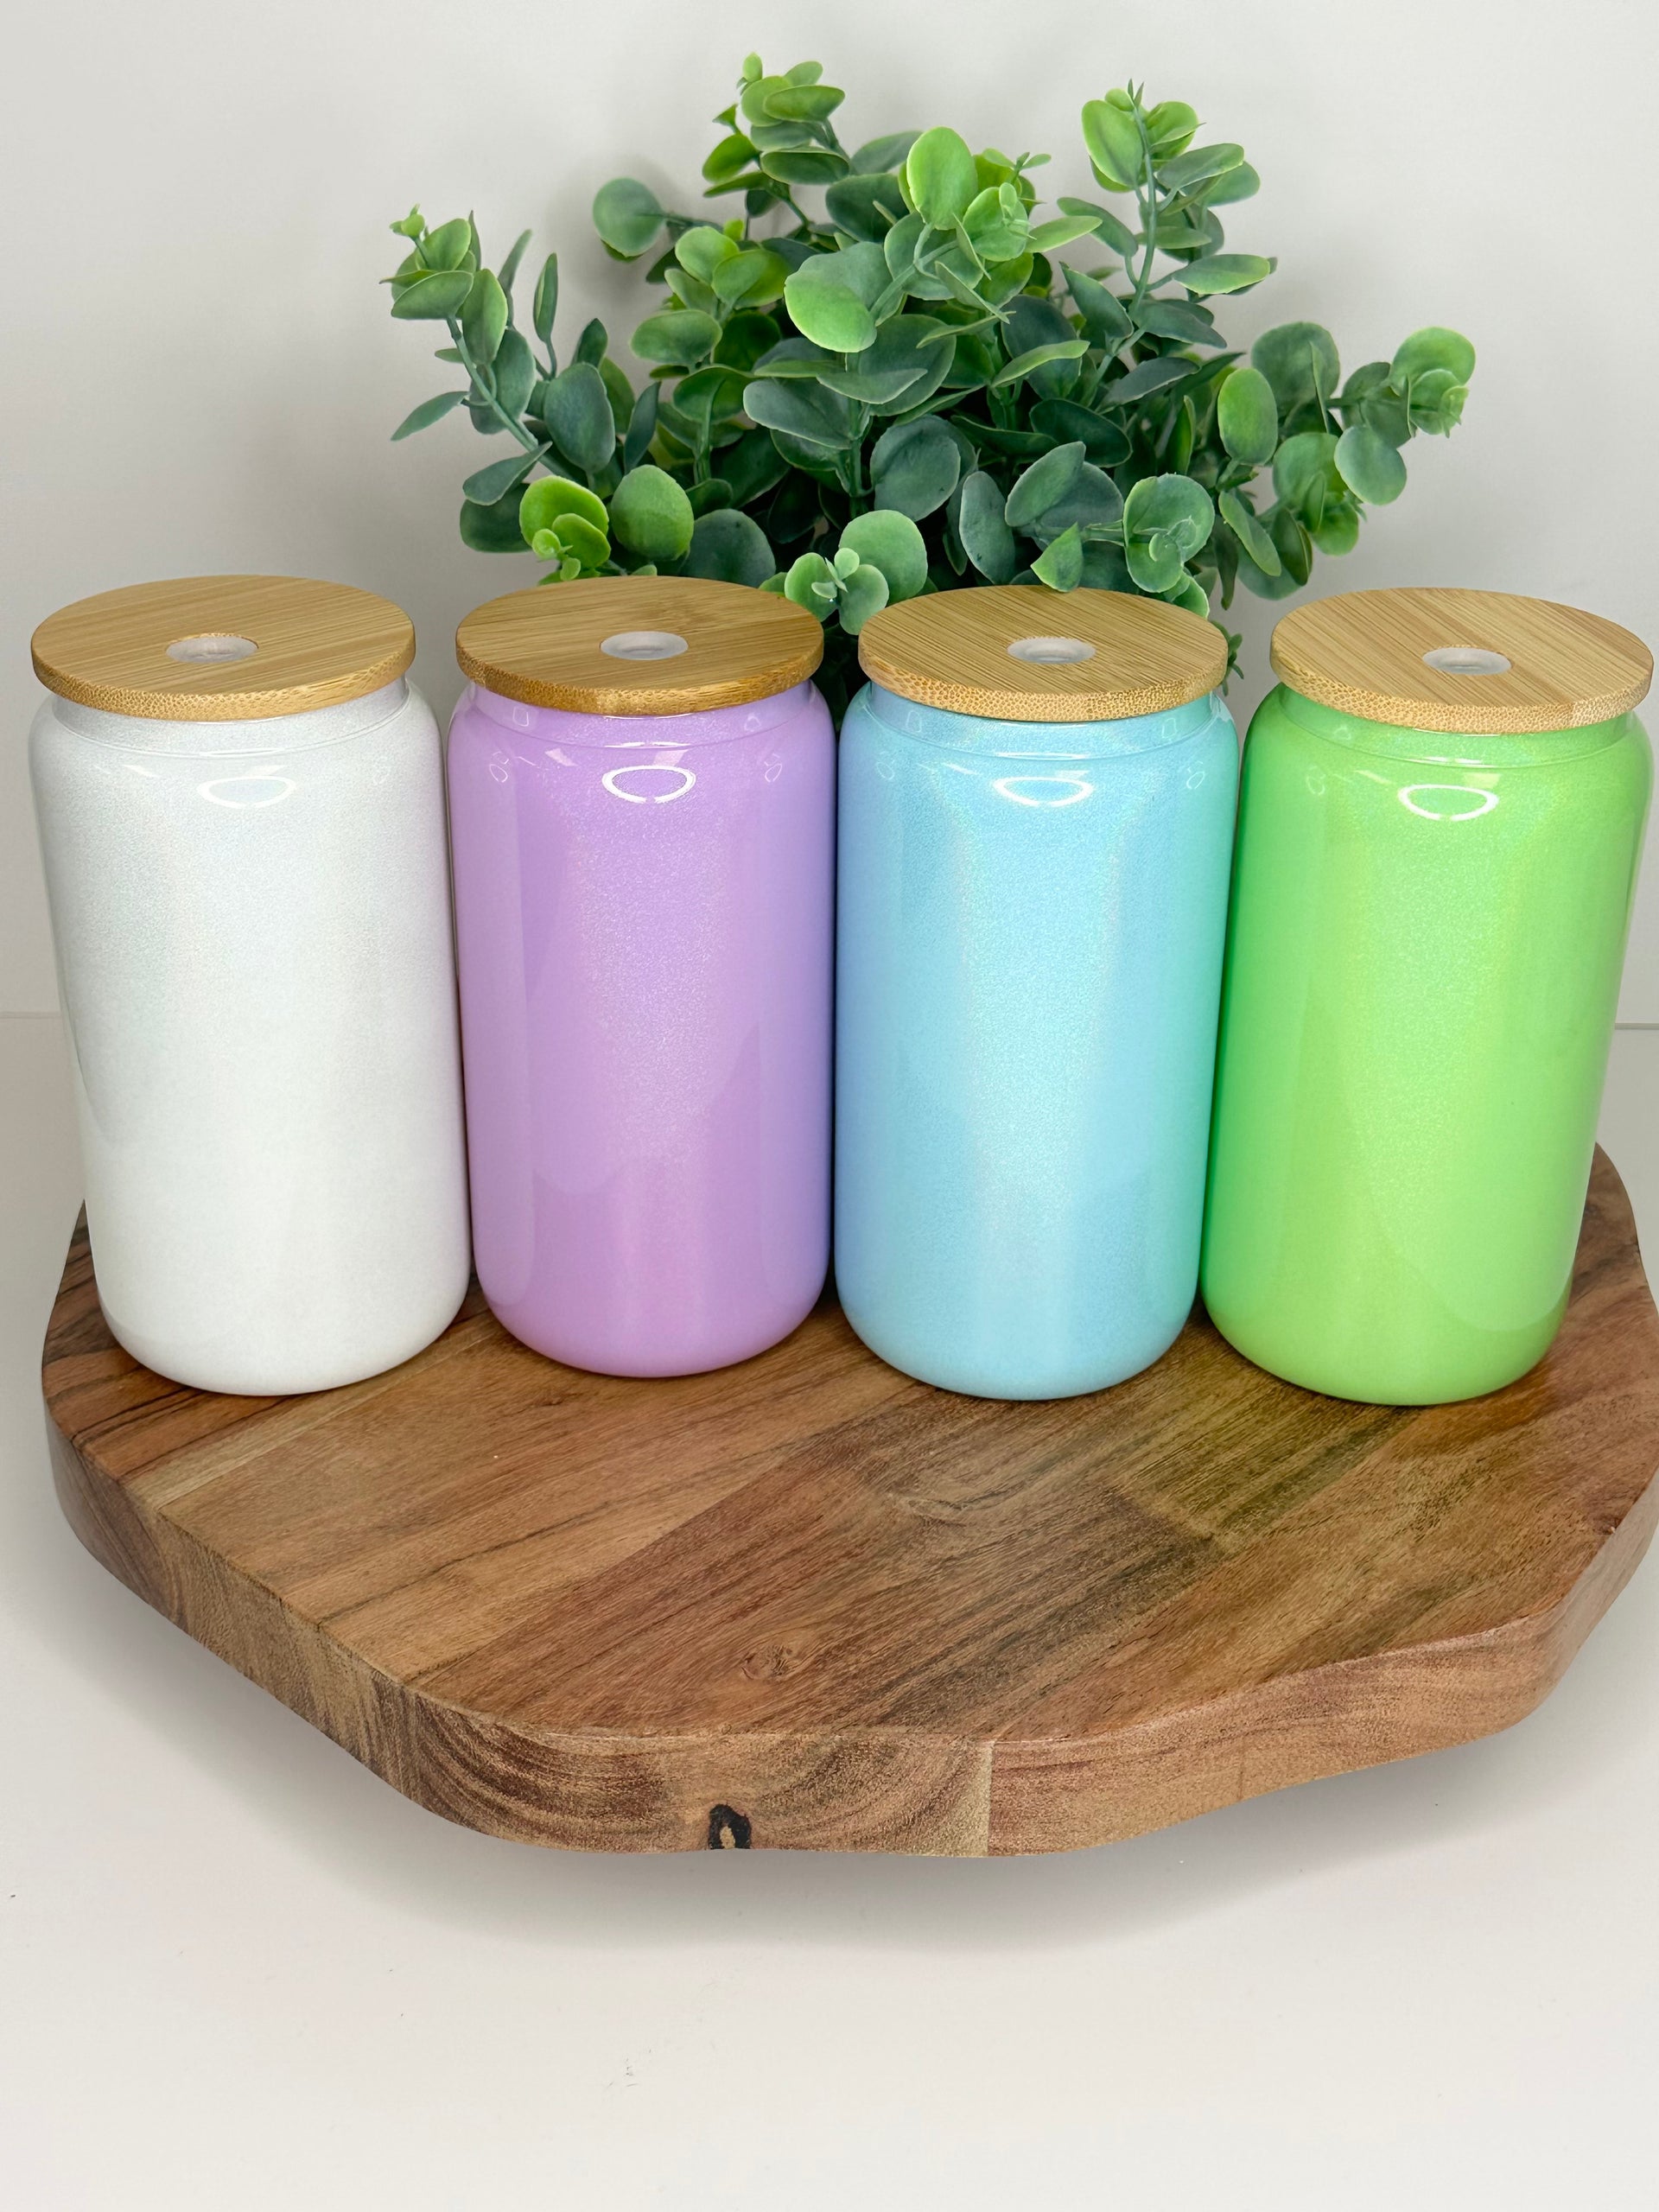 merryjoy 8 pack sublimation glass blanks with bamboo lid,16 oz